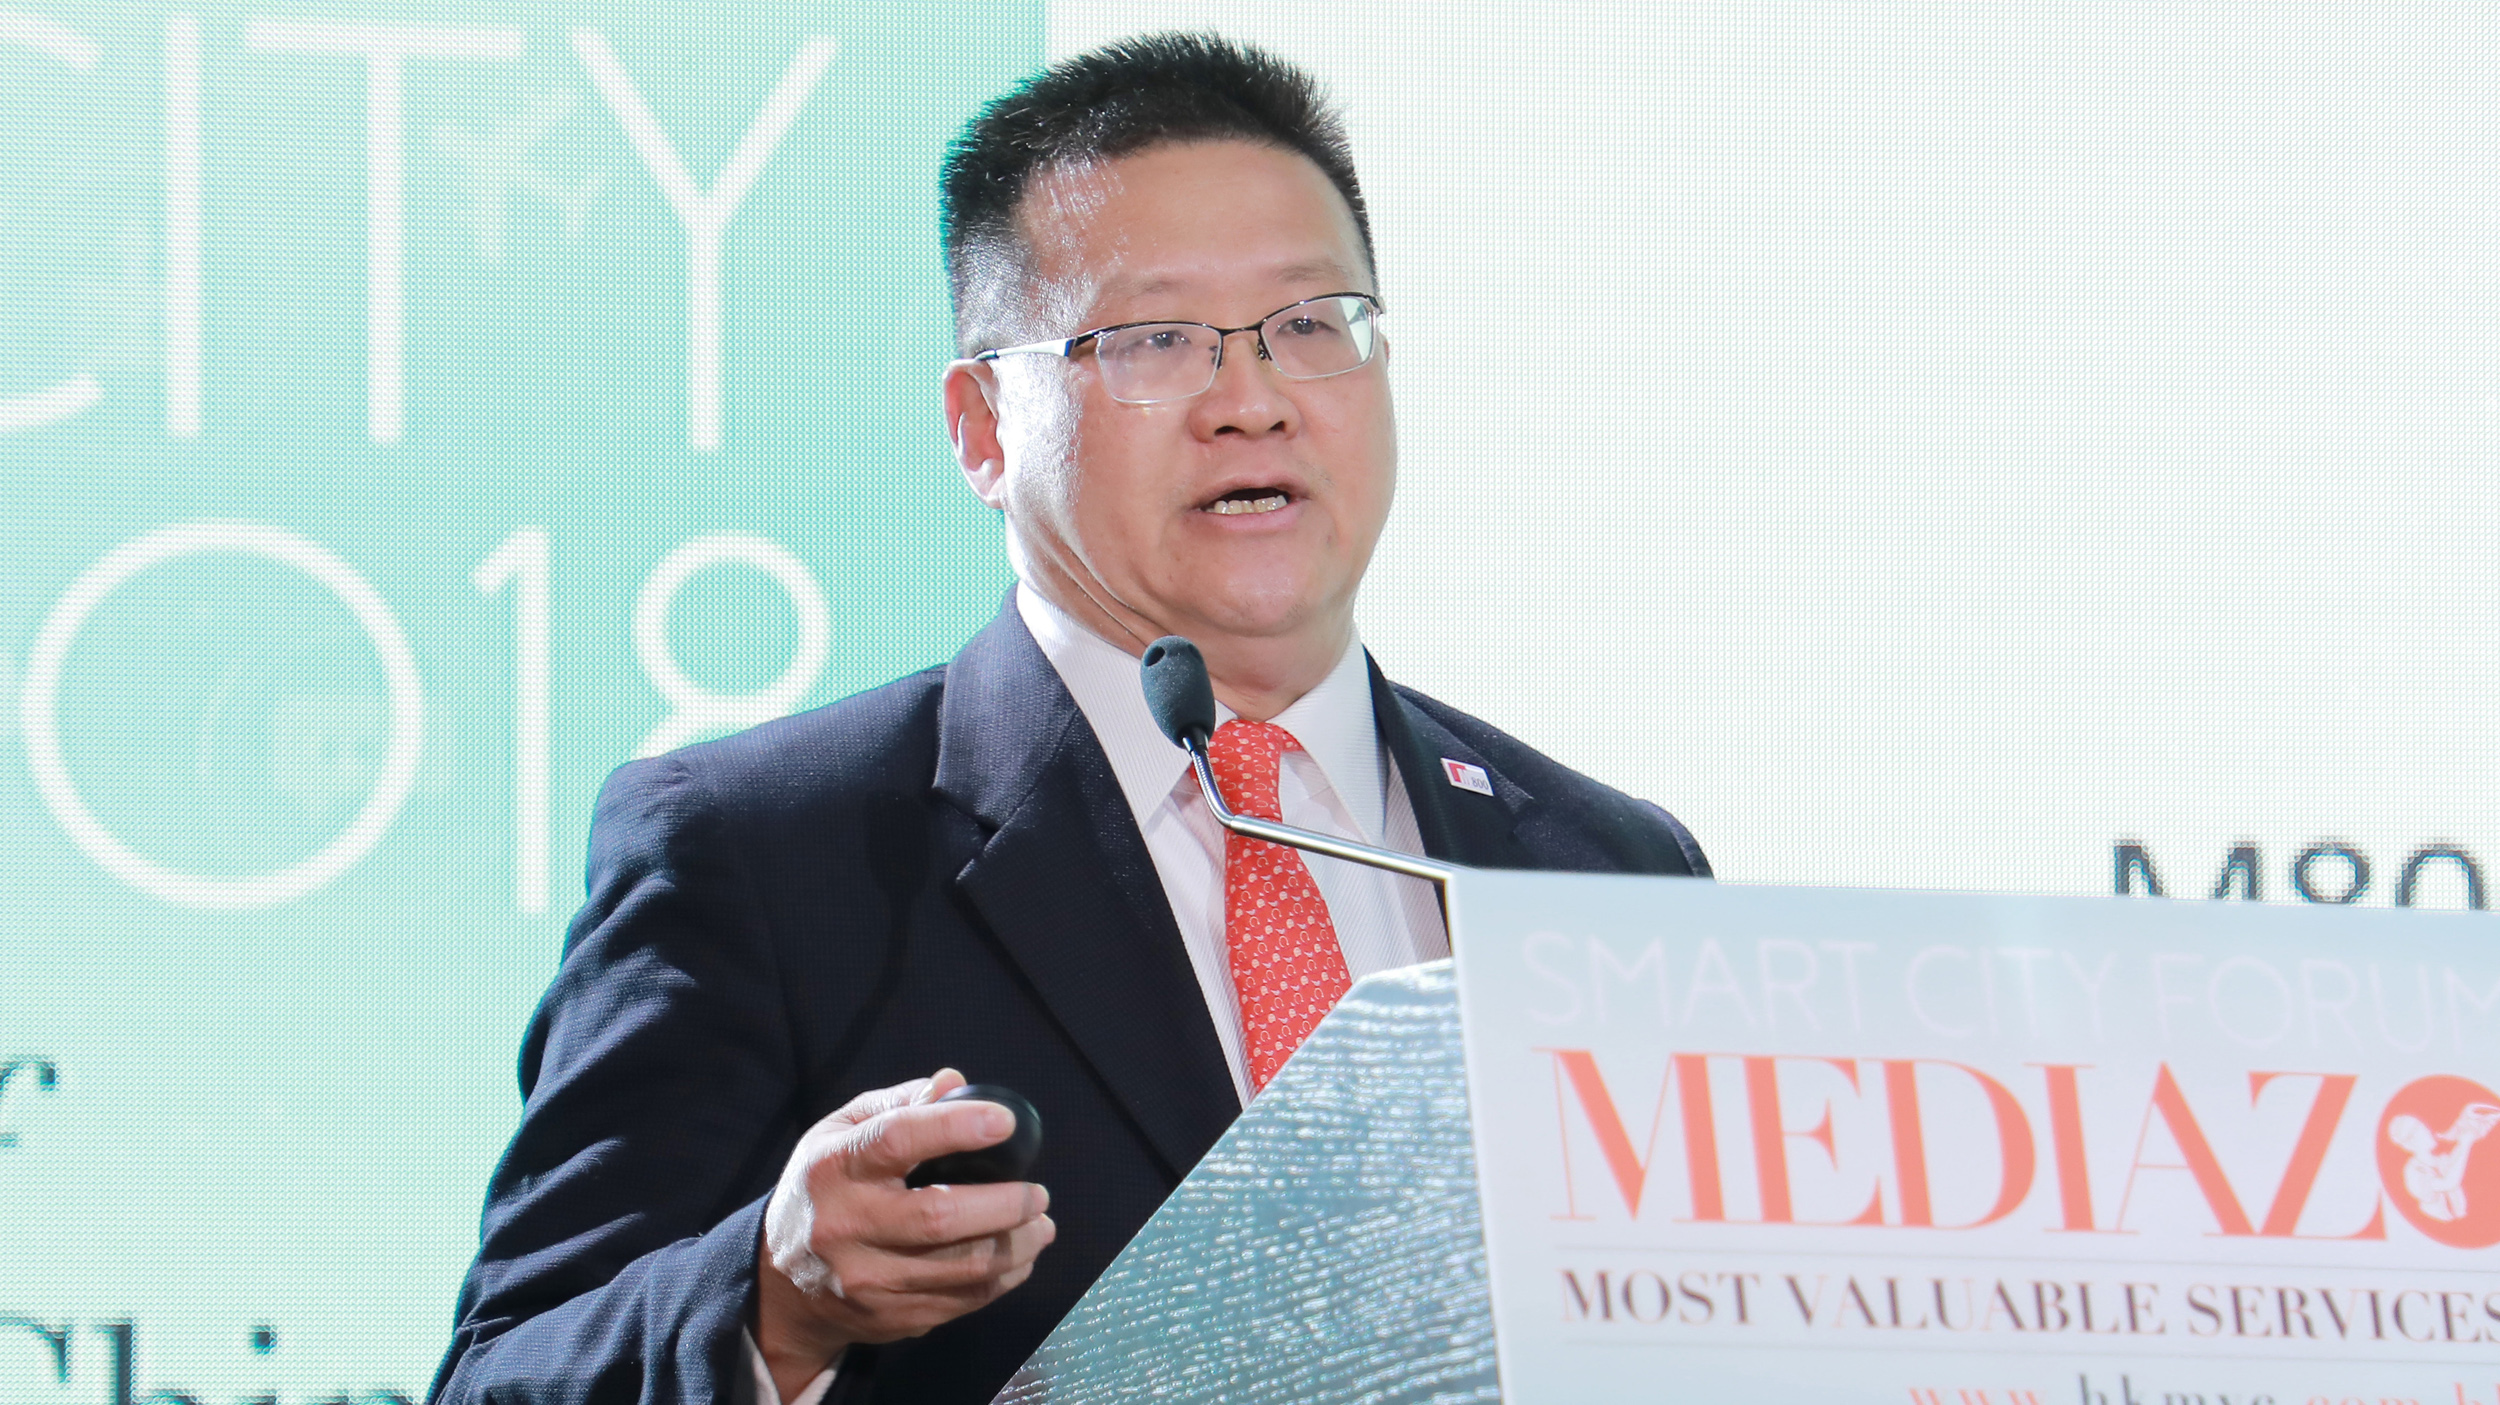 Steven YAP, CEO of M800, presented the topic of “Building Smart Cities: Why IoT Is The Key” at the Smart City Forum.